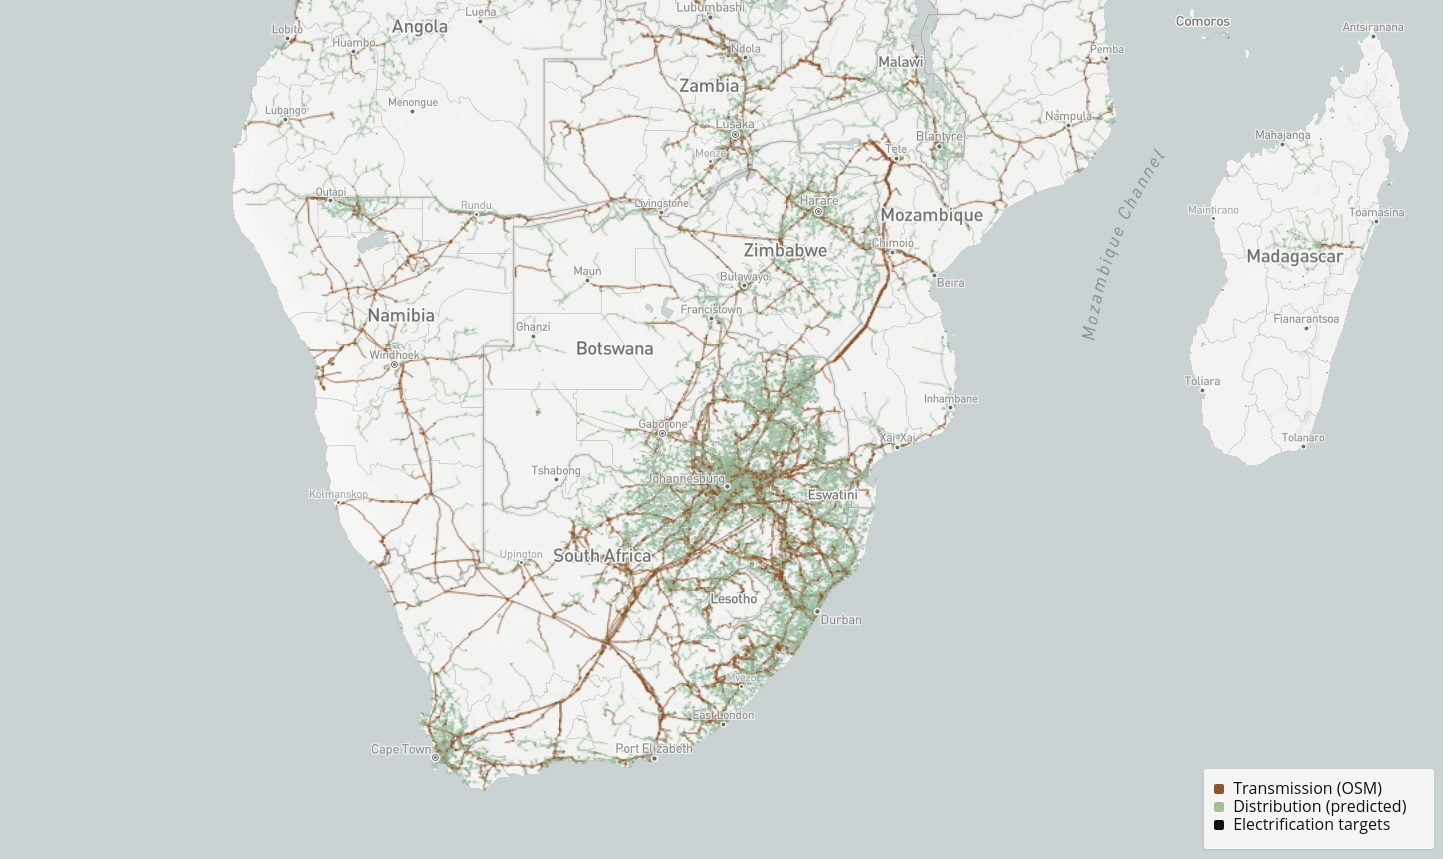 A screenshot from gridfinder.org showing Southern Africa.